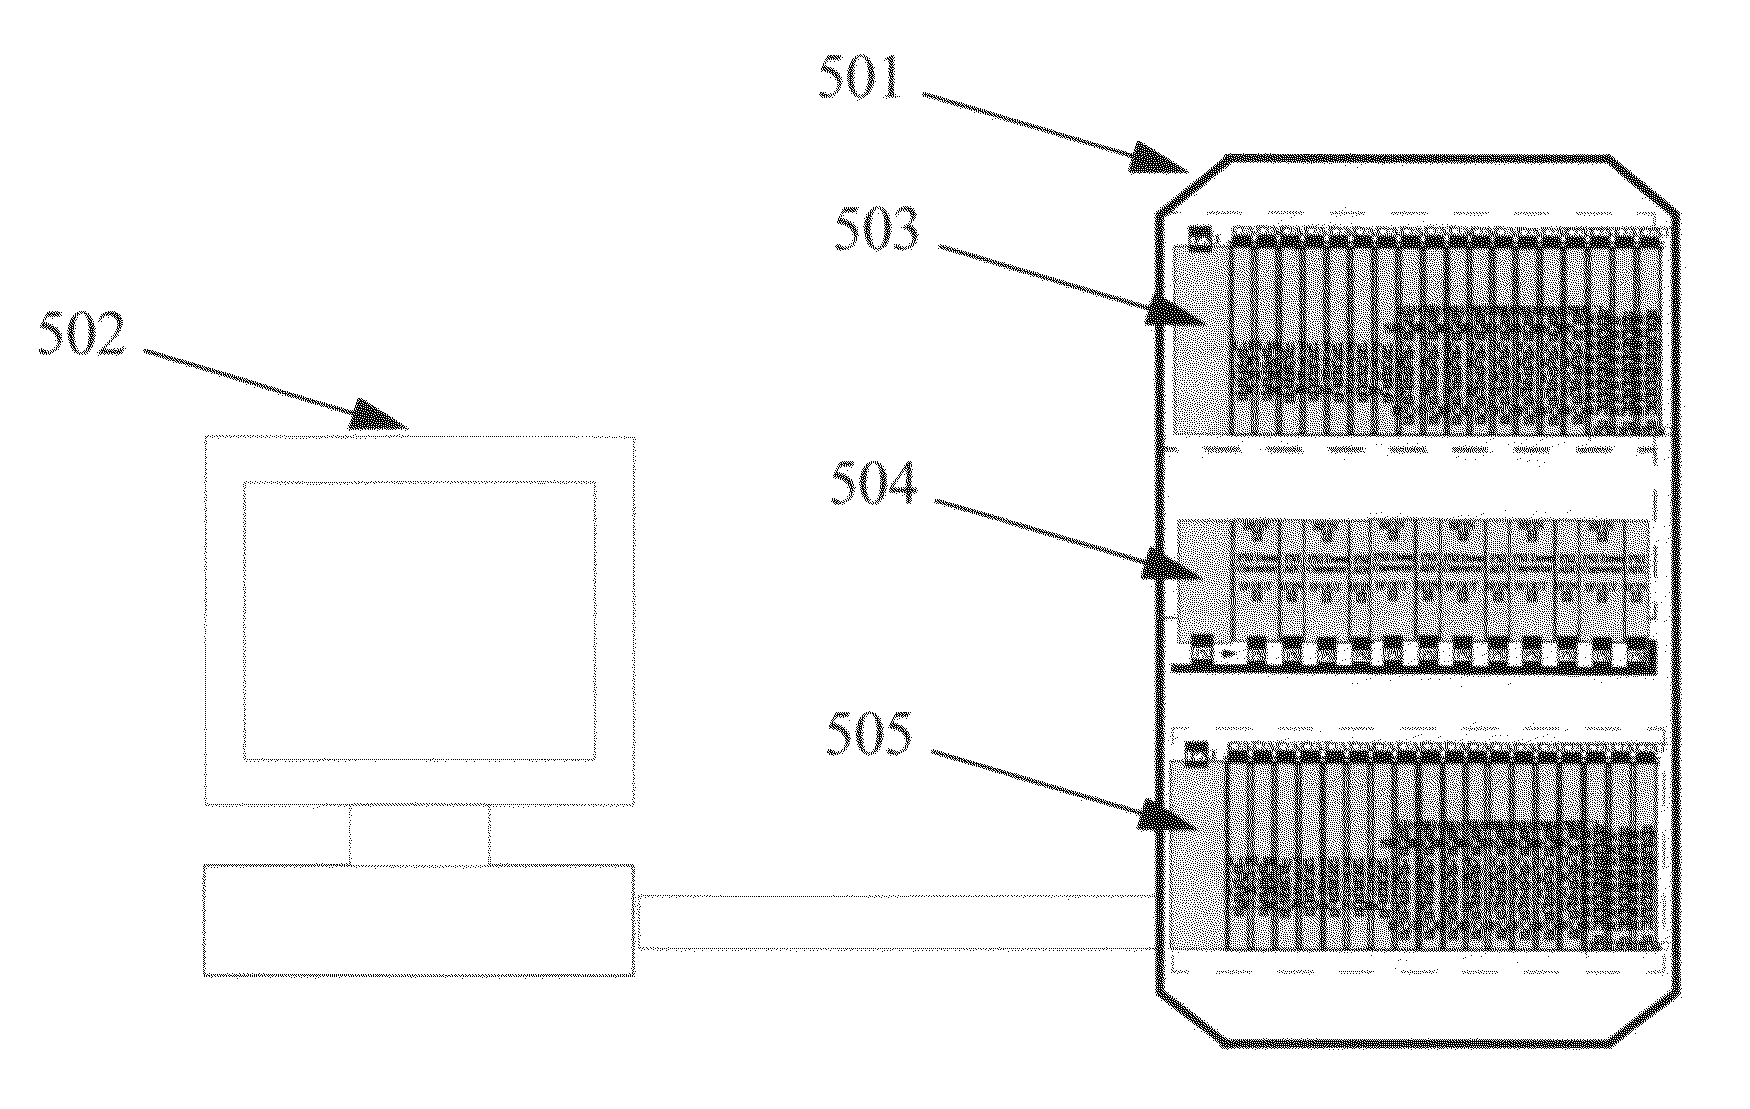 Apparatus for high density low cost automatic test applications